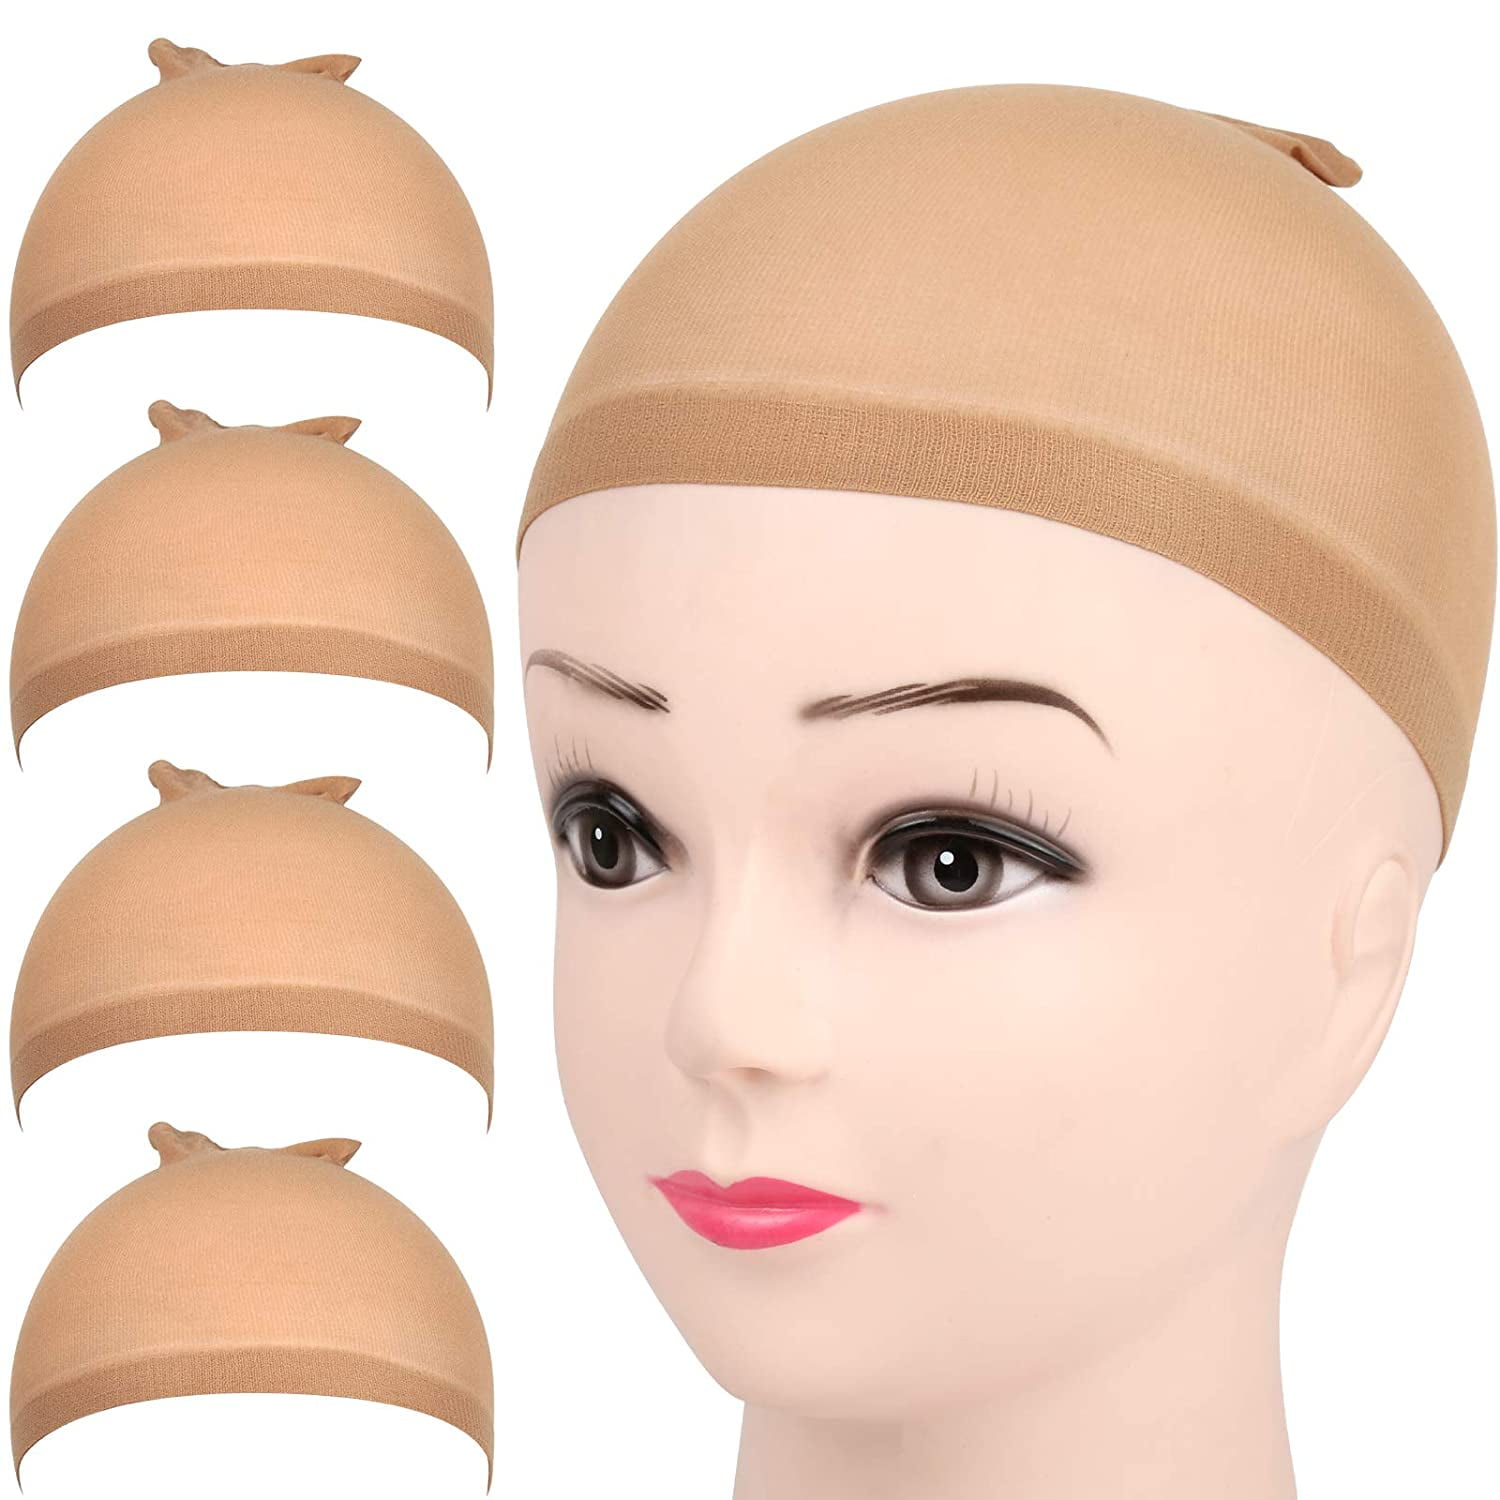 12 Pack Wig Caps for Front Stocking Wig Cap for Bald Cap for - Walmart.com